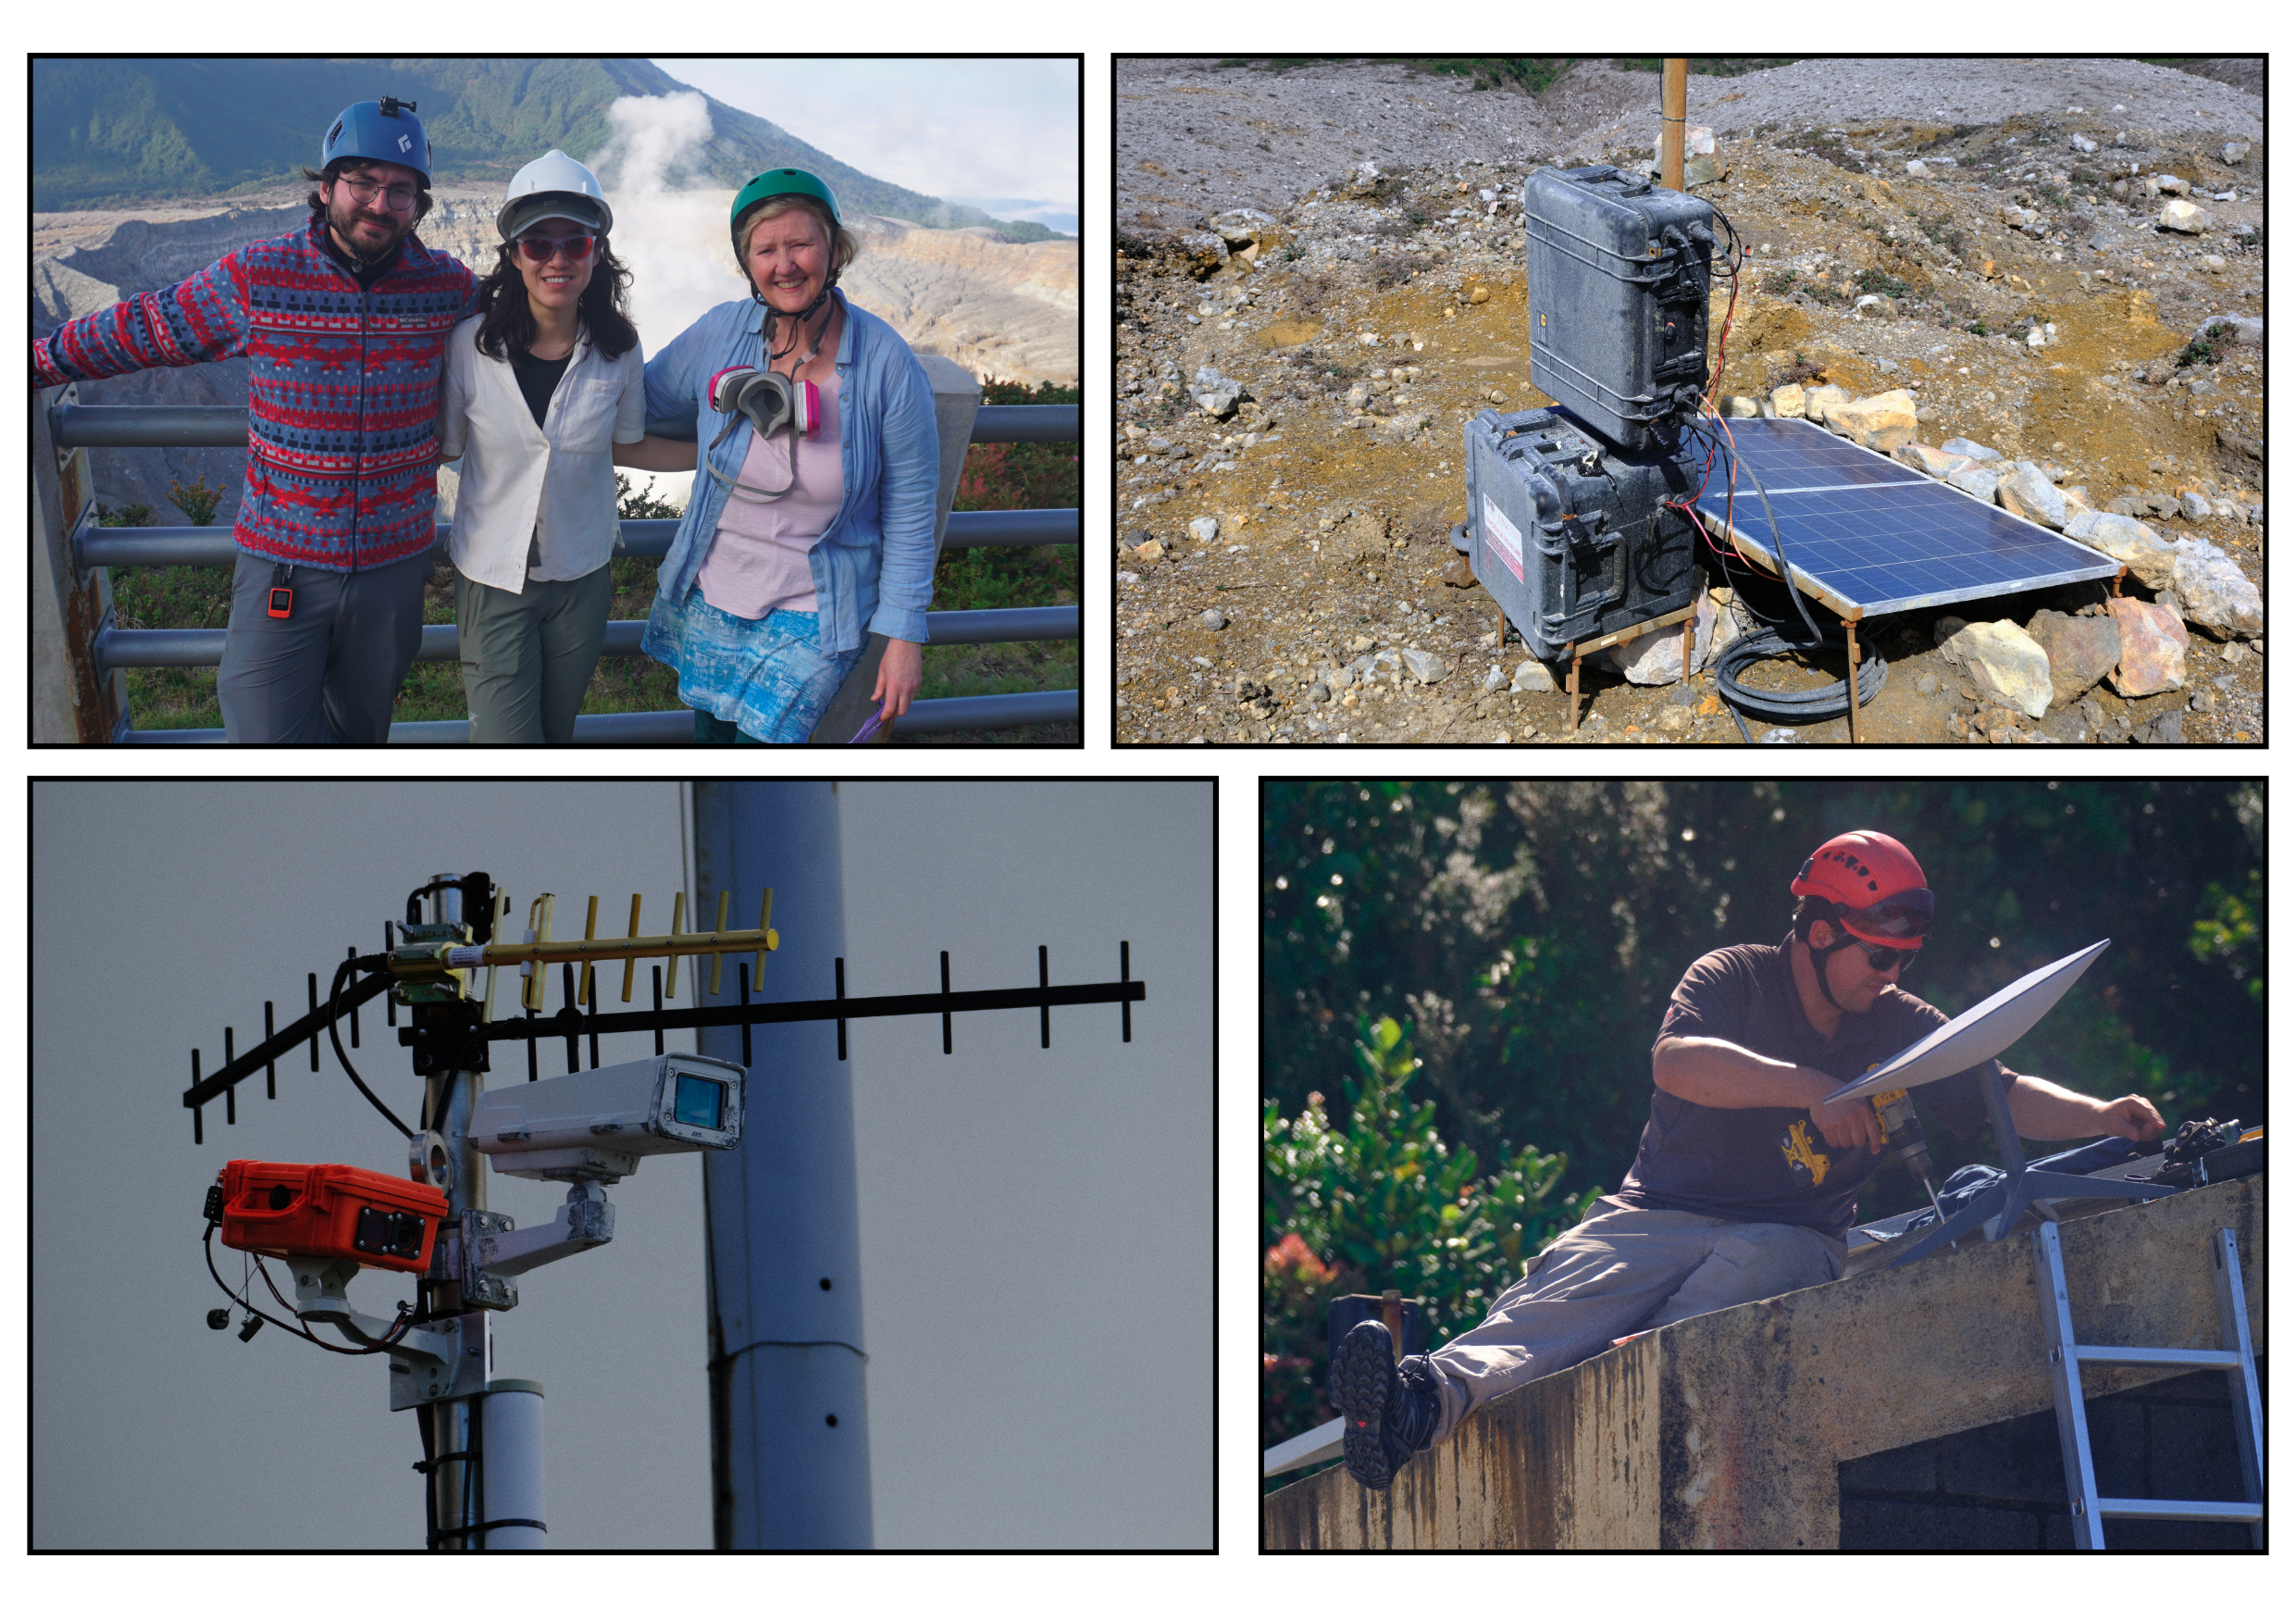 Team AVERT. Top left: AVERT post-doc Conor Bacon, Lamont Data Science Fellow Sarah Shi, and AVERT PI Terry Plank at the Mirador. Top right: One of the sites deployed in November showing the effects of the acid gases that come off the crater lake. Bottom left: The new dual-camera system (including IR and visible spectrum cameras, in the orange Pelican case) alongside the existing OVSICORI webcam and radio telemetry array. Bottom right: John Bolaños Paniagua installing the Starlink dish on top of the Mirador hut.